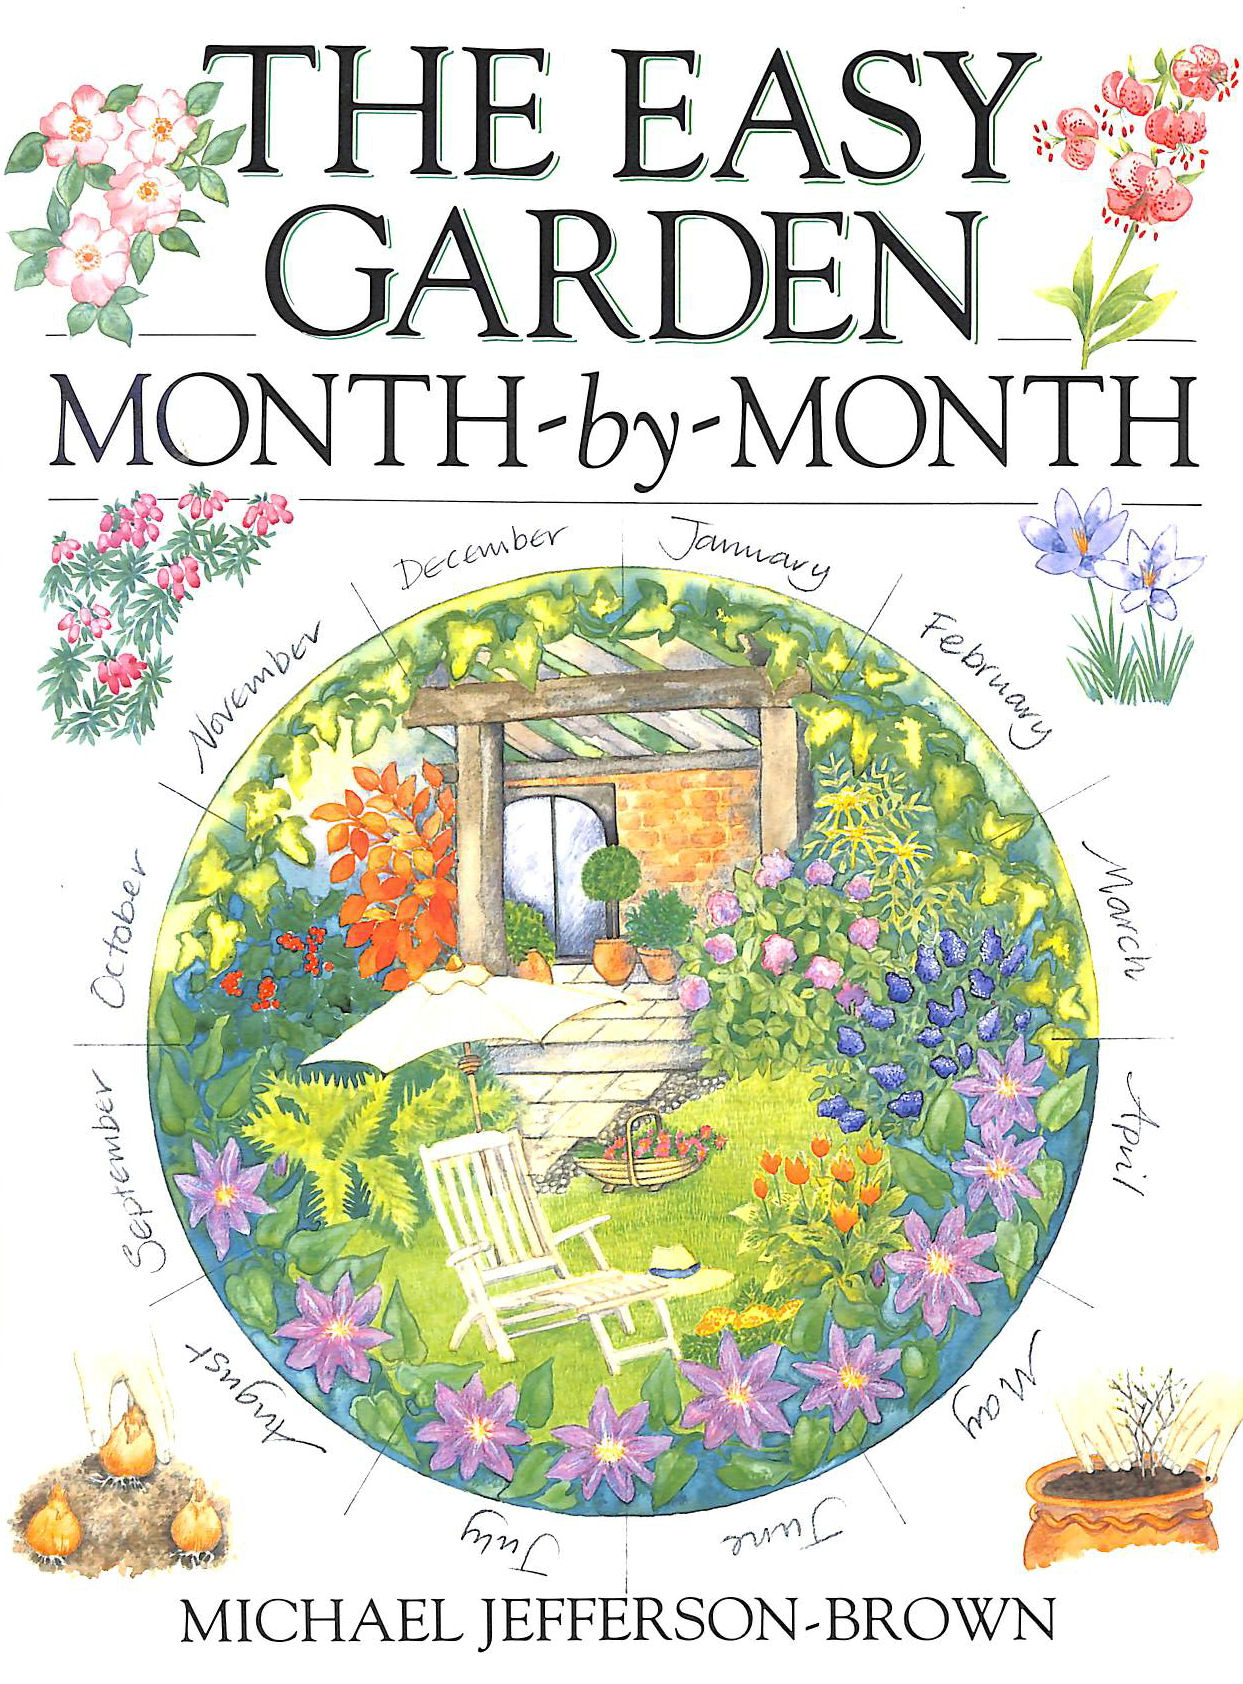 JEFFERSON-BROWN, MICHAEL - The Easy Garden Month-by-month